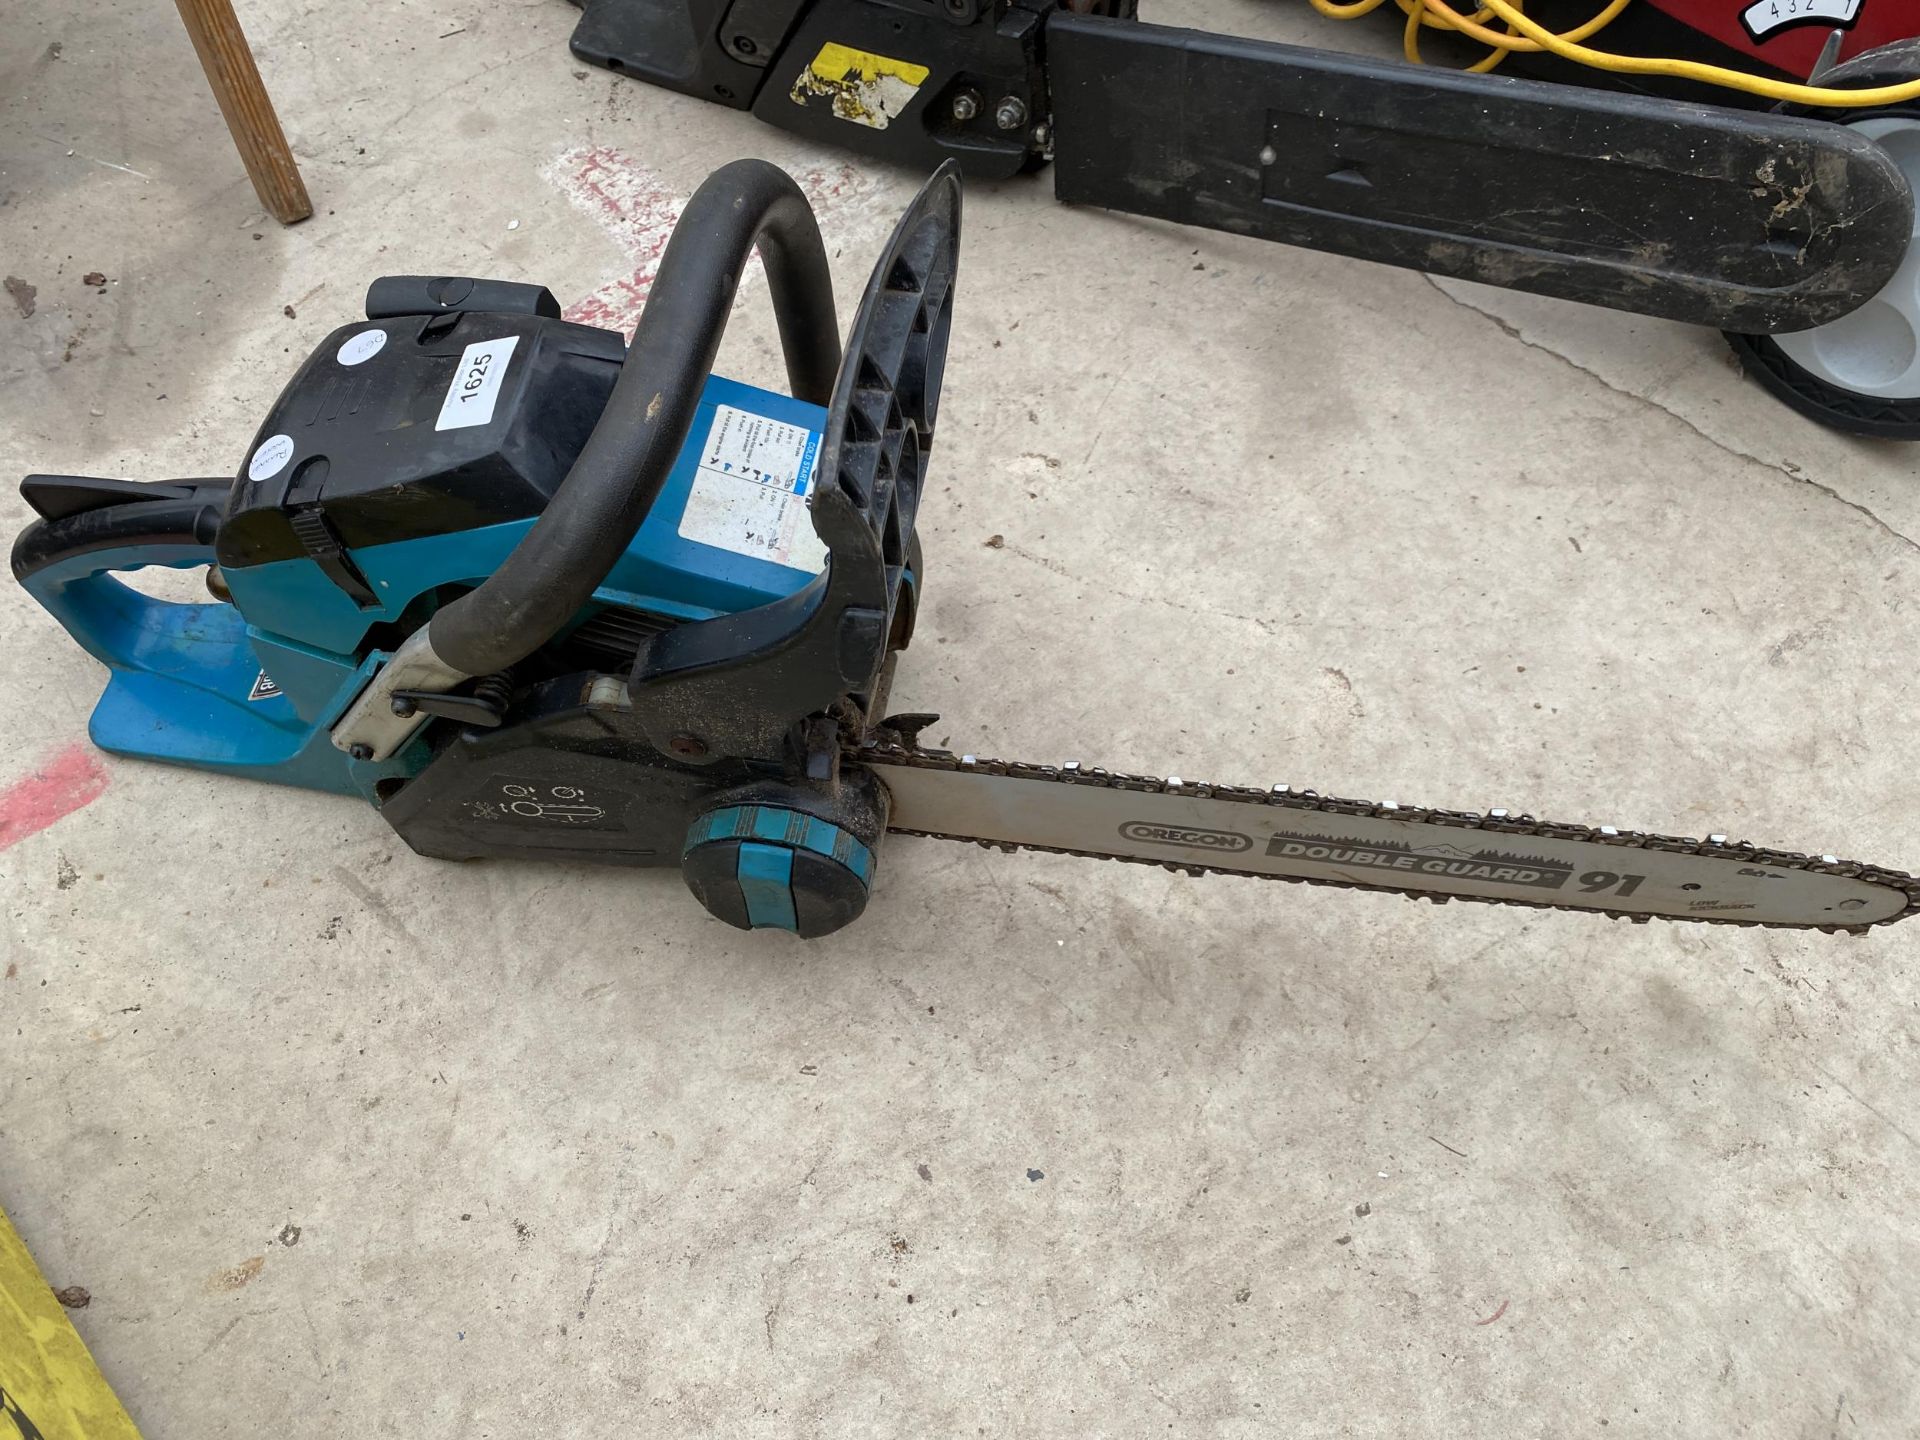 A 41CC PETROL CHAINSAW BELIEVED IN WORKING ORDER BUT NO WARRANTY